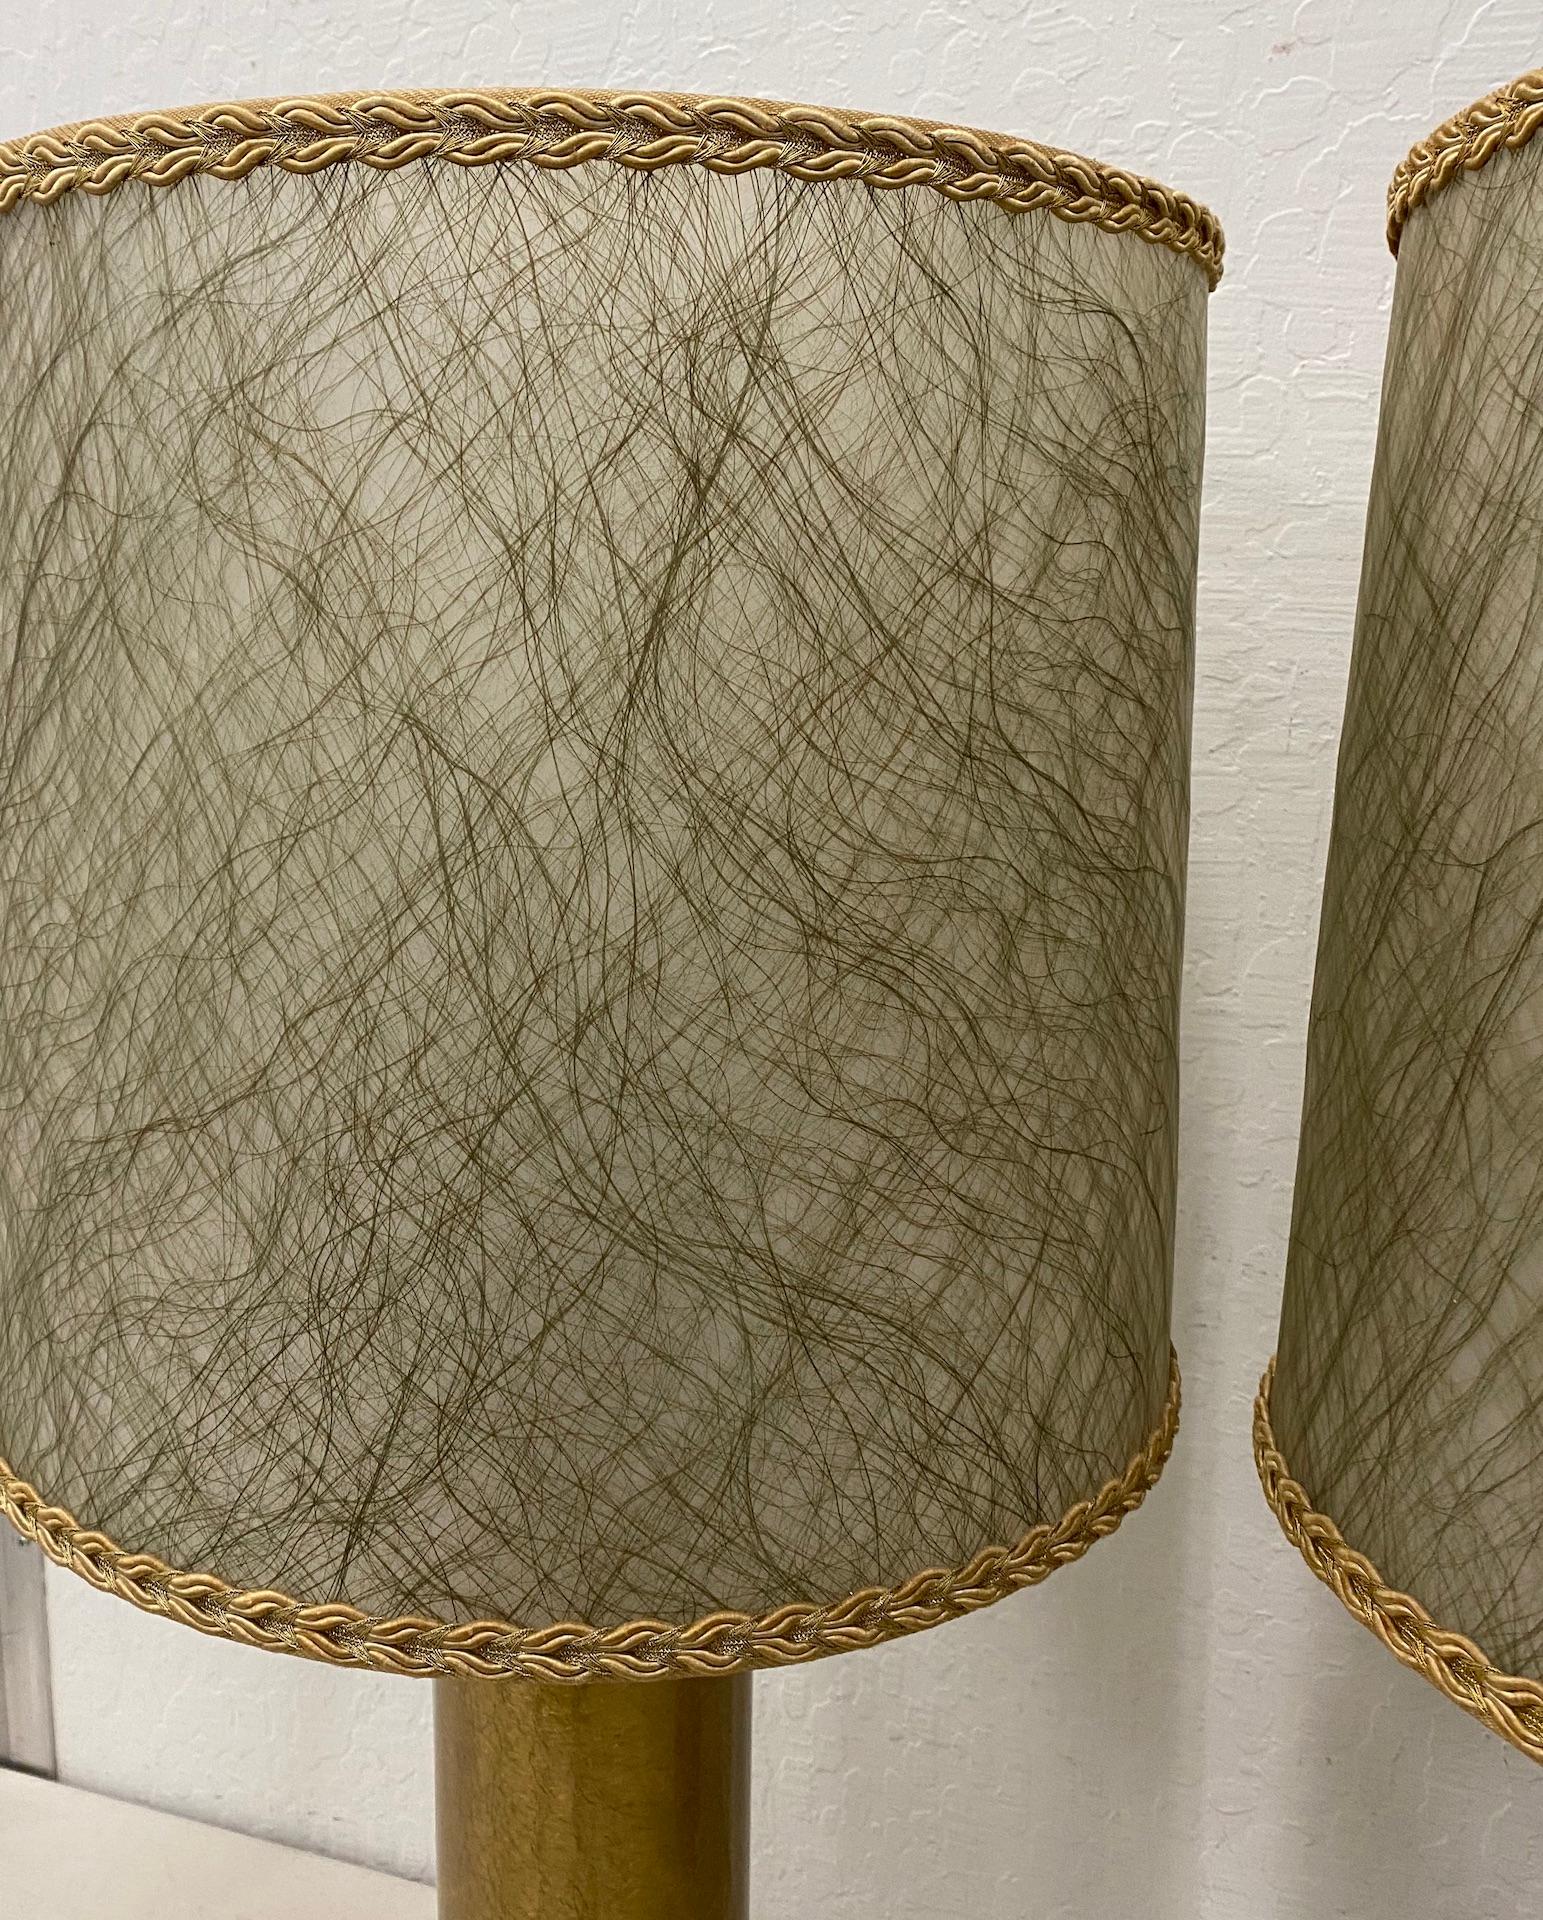 Paul Hanson Crackled 'Foil' Glass Lamps with Original Shades, circa 1950 2